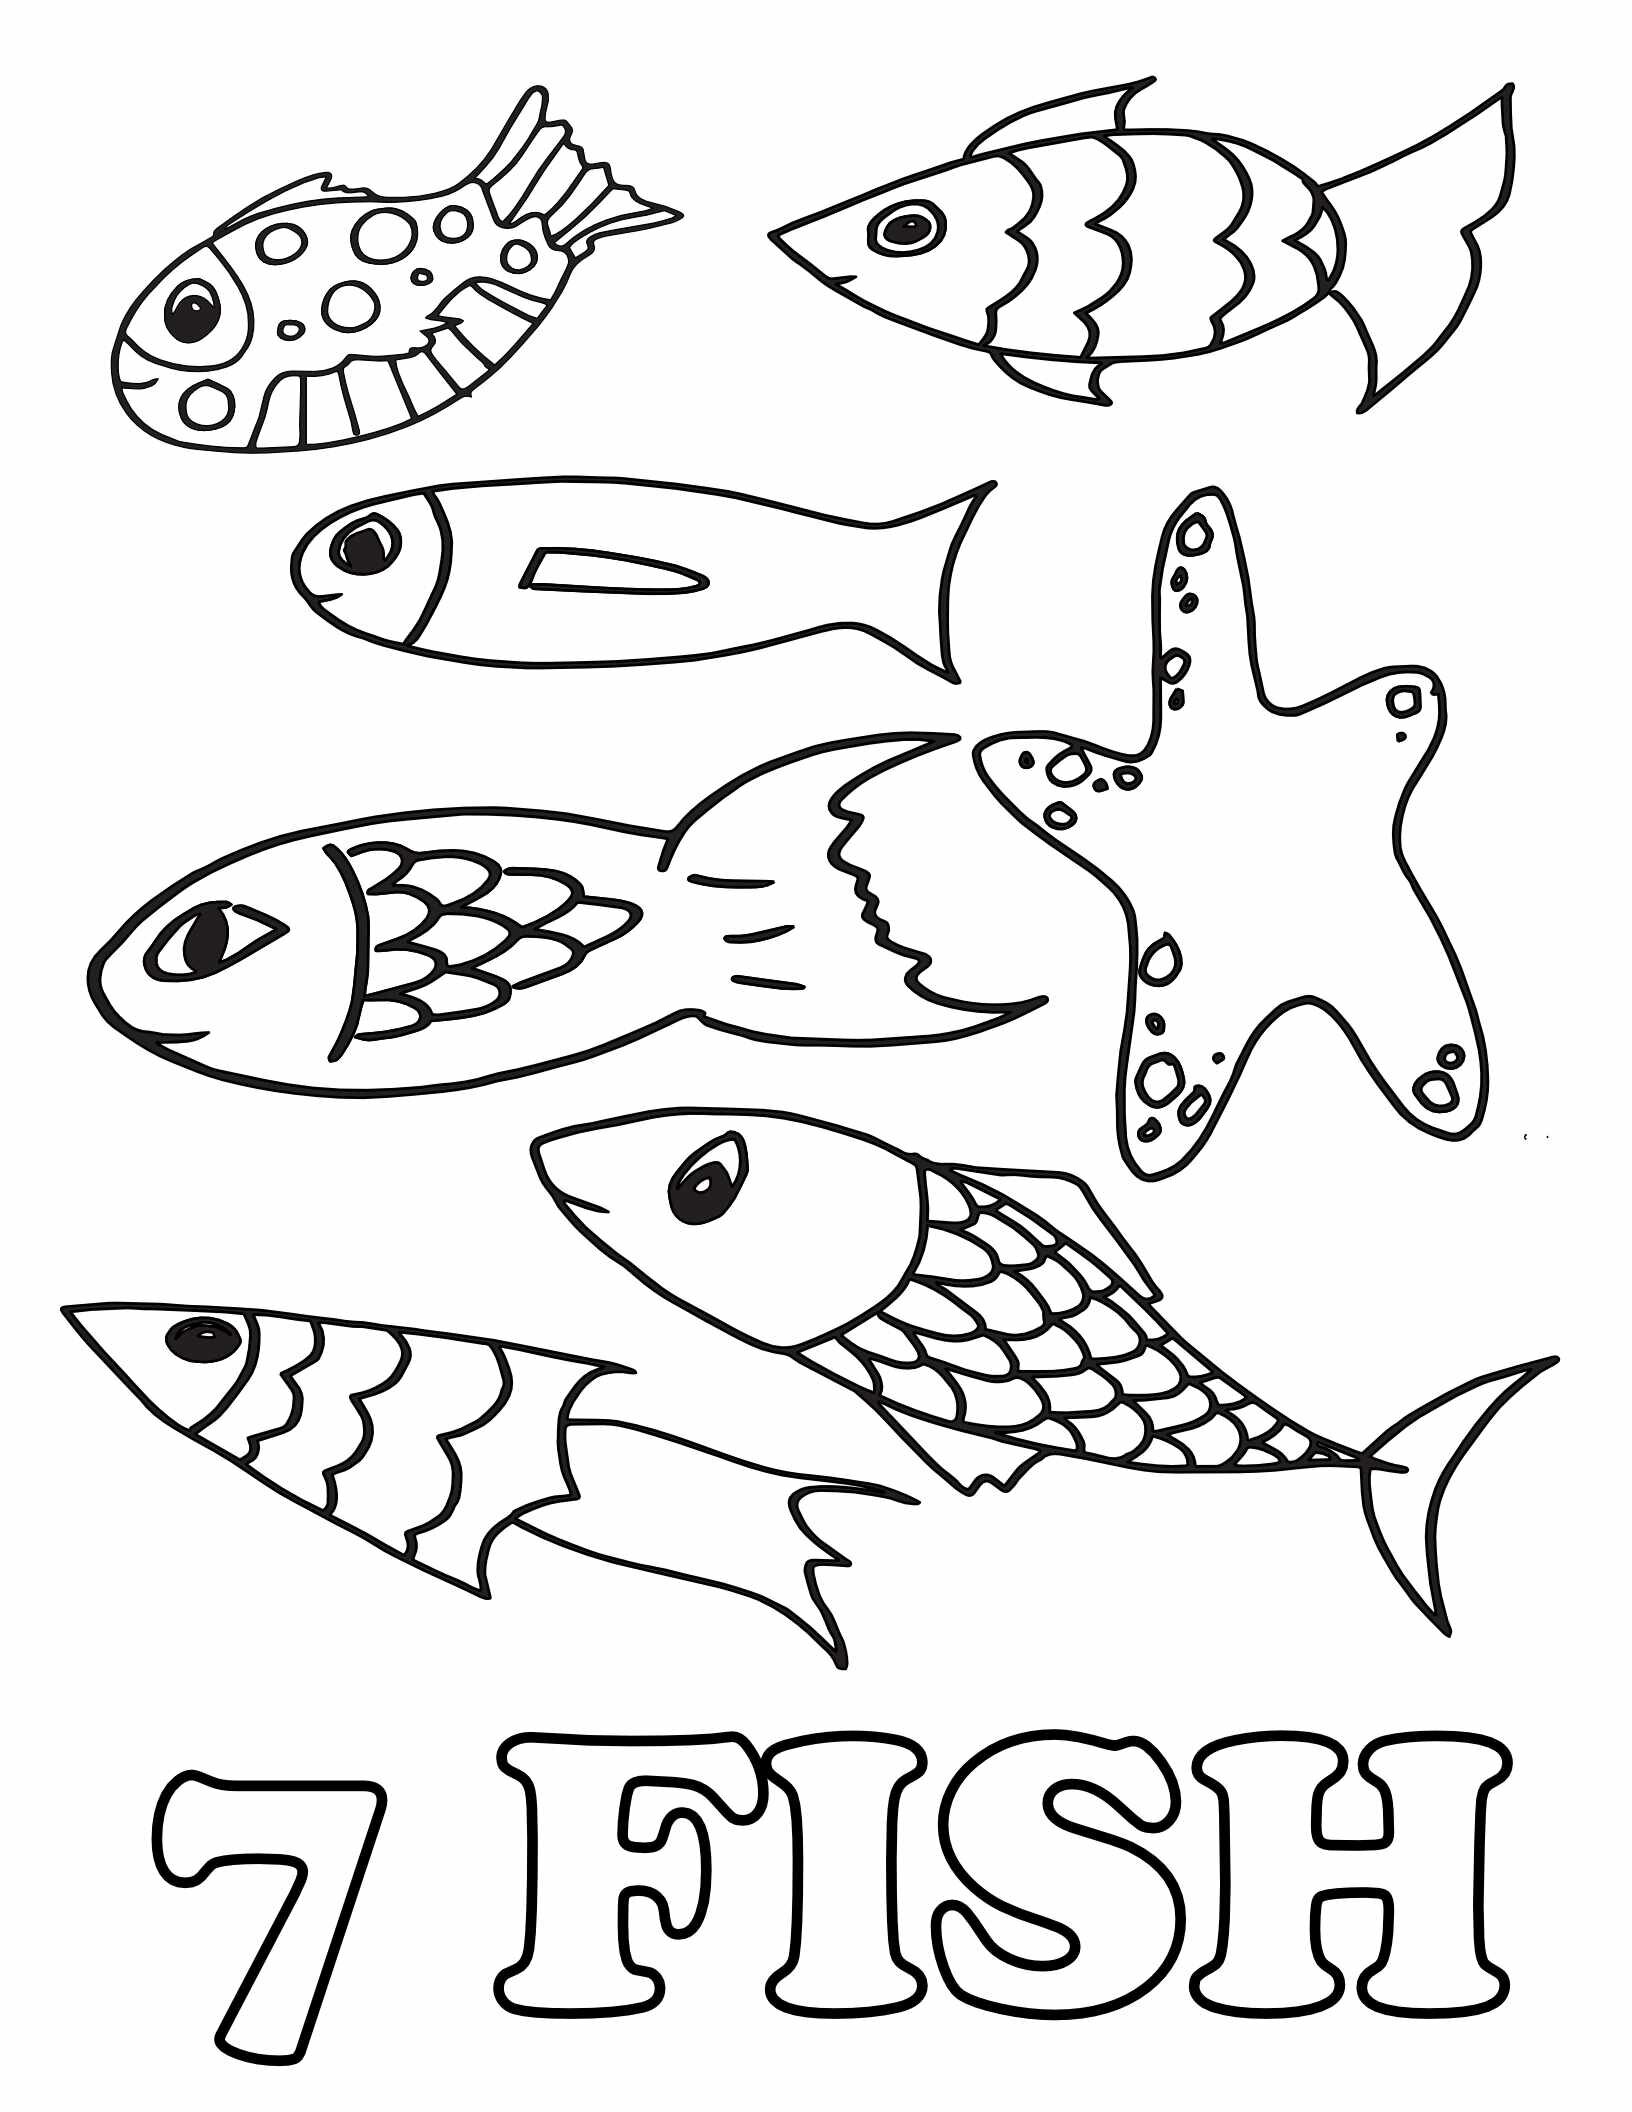 10 Free Animal Number Coloring Pages -  7 Fish